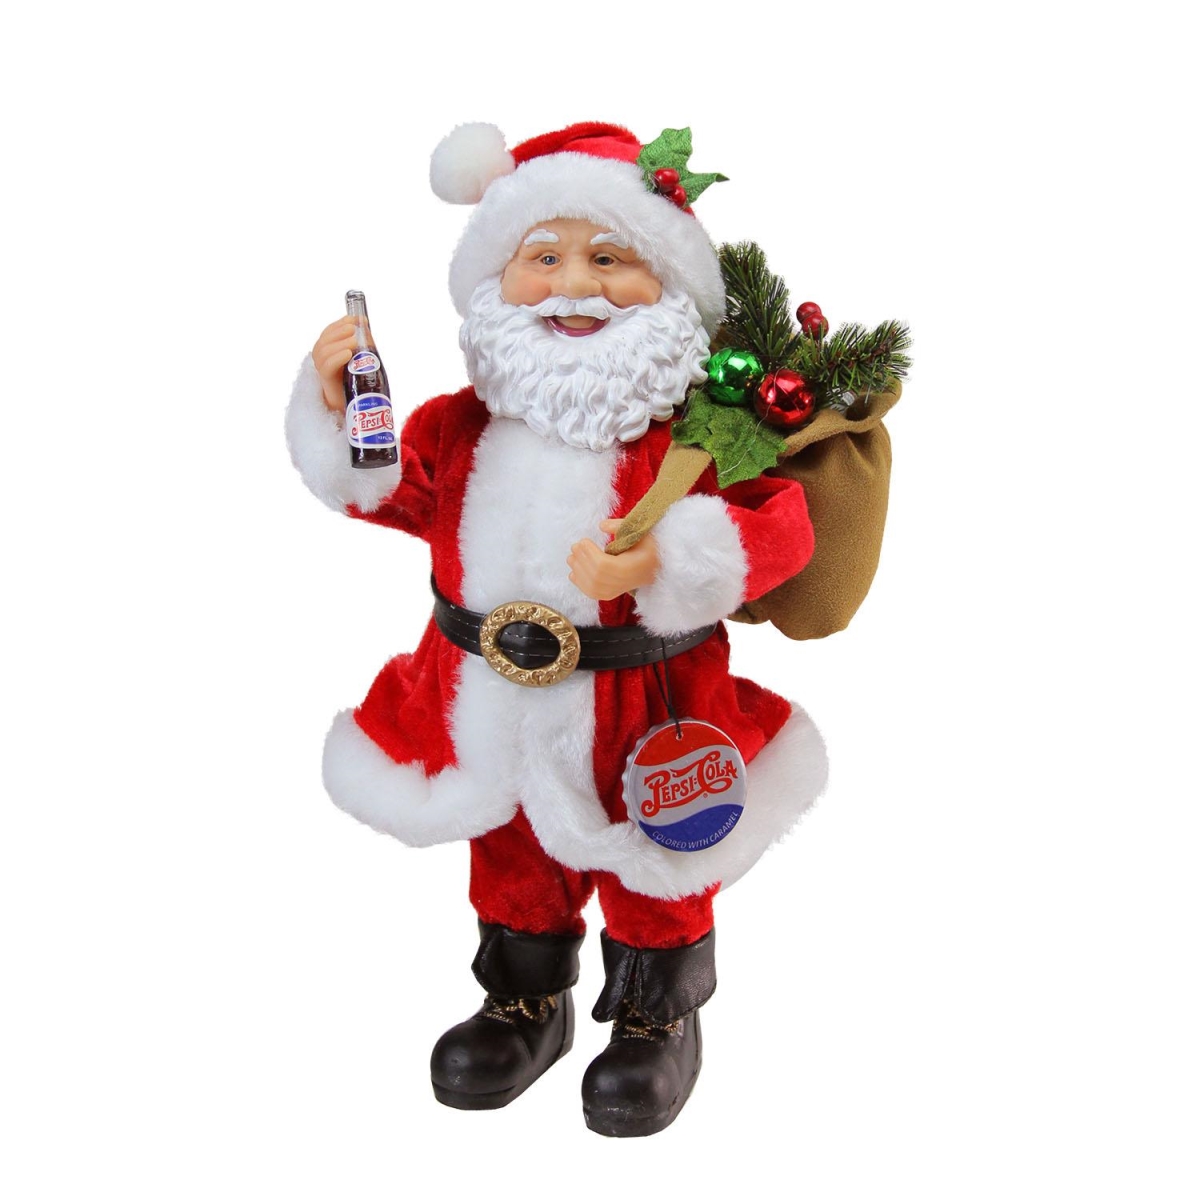 32275384 12 In. Santa Claus With Gift Sack Holding Pepsi-cola Bottle & Cap Christmas Figure